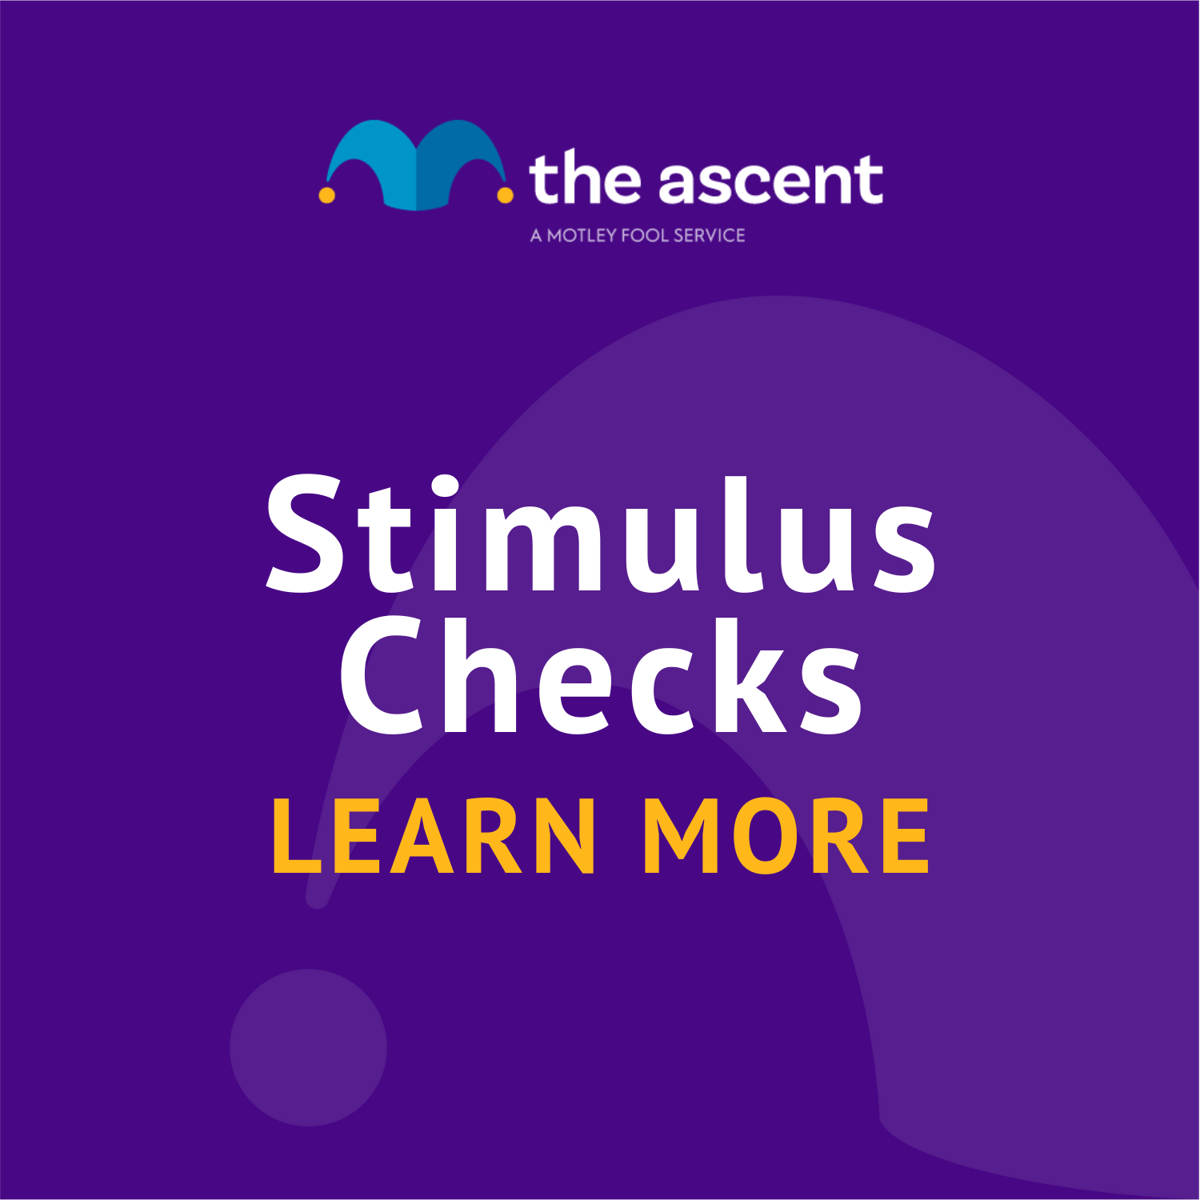 What Is a Stimulus Check? Definition, How It Works, and Criticism